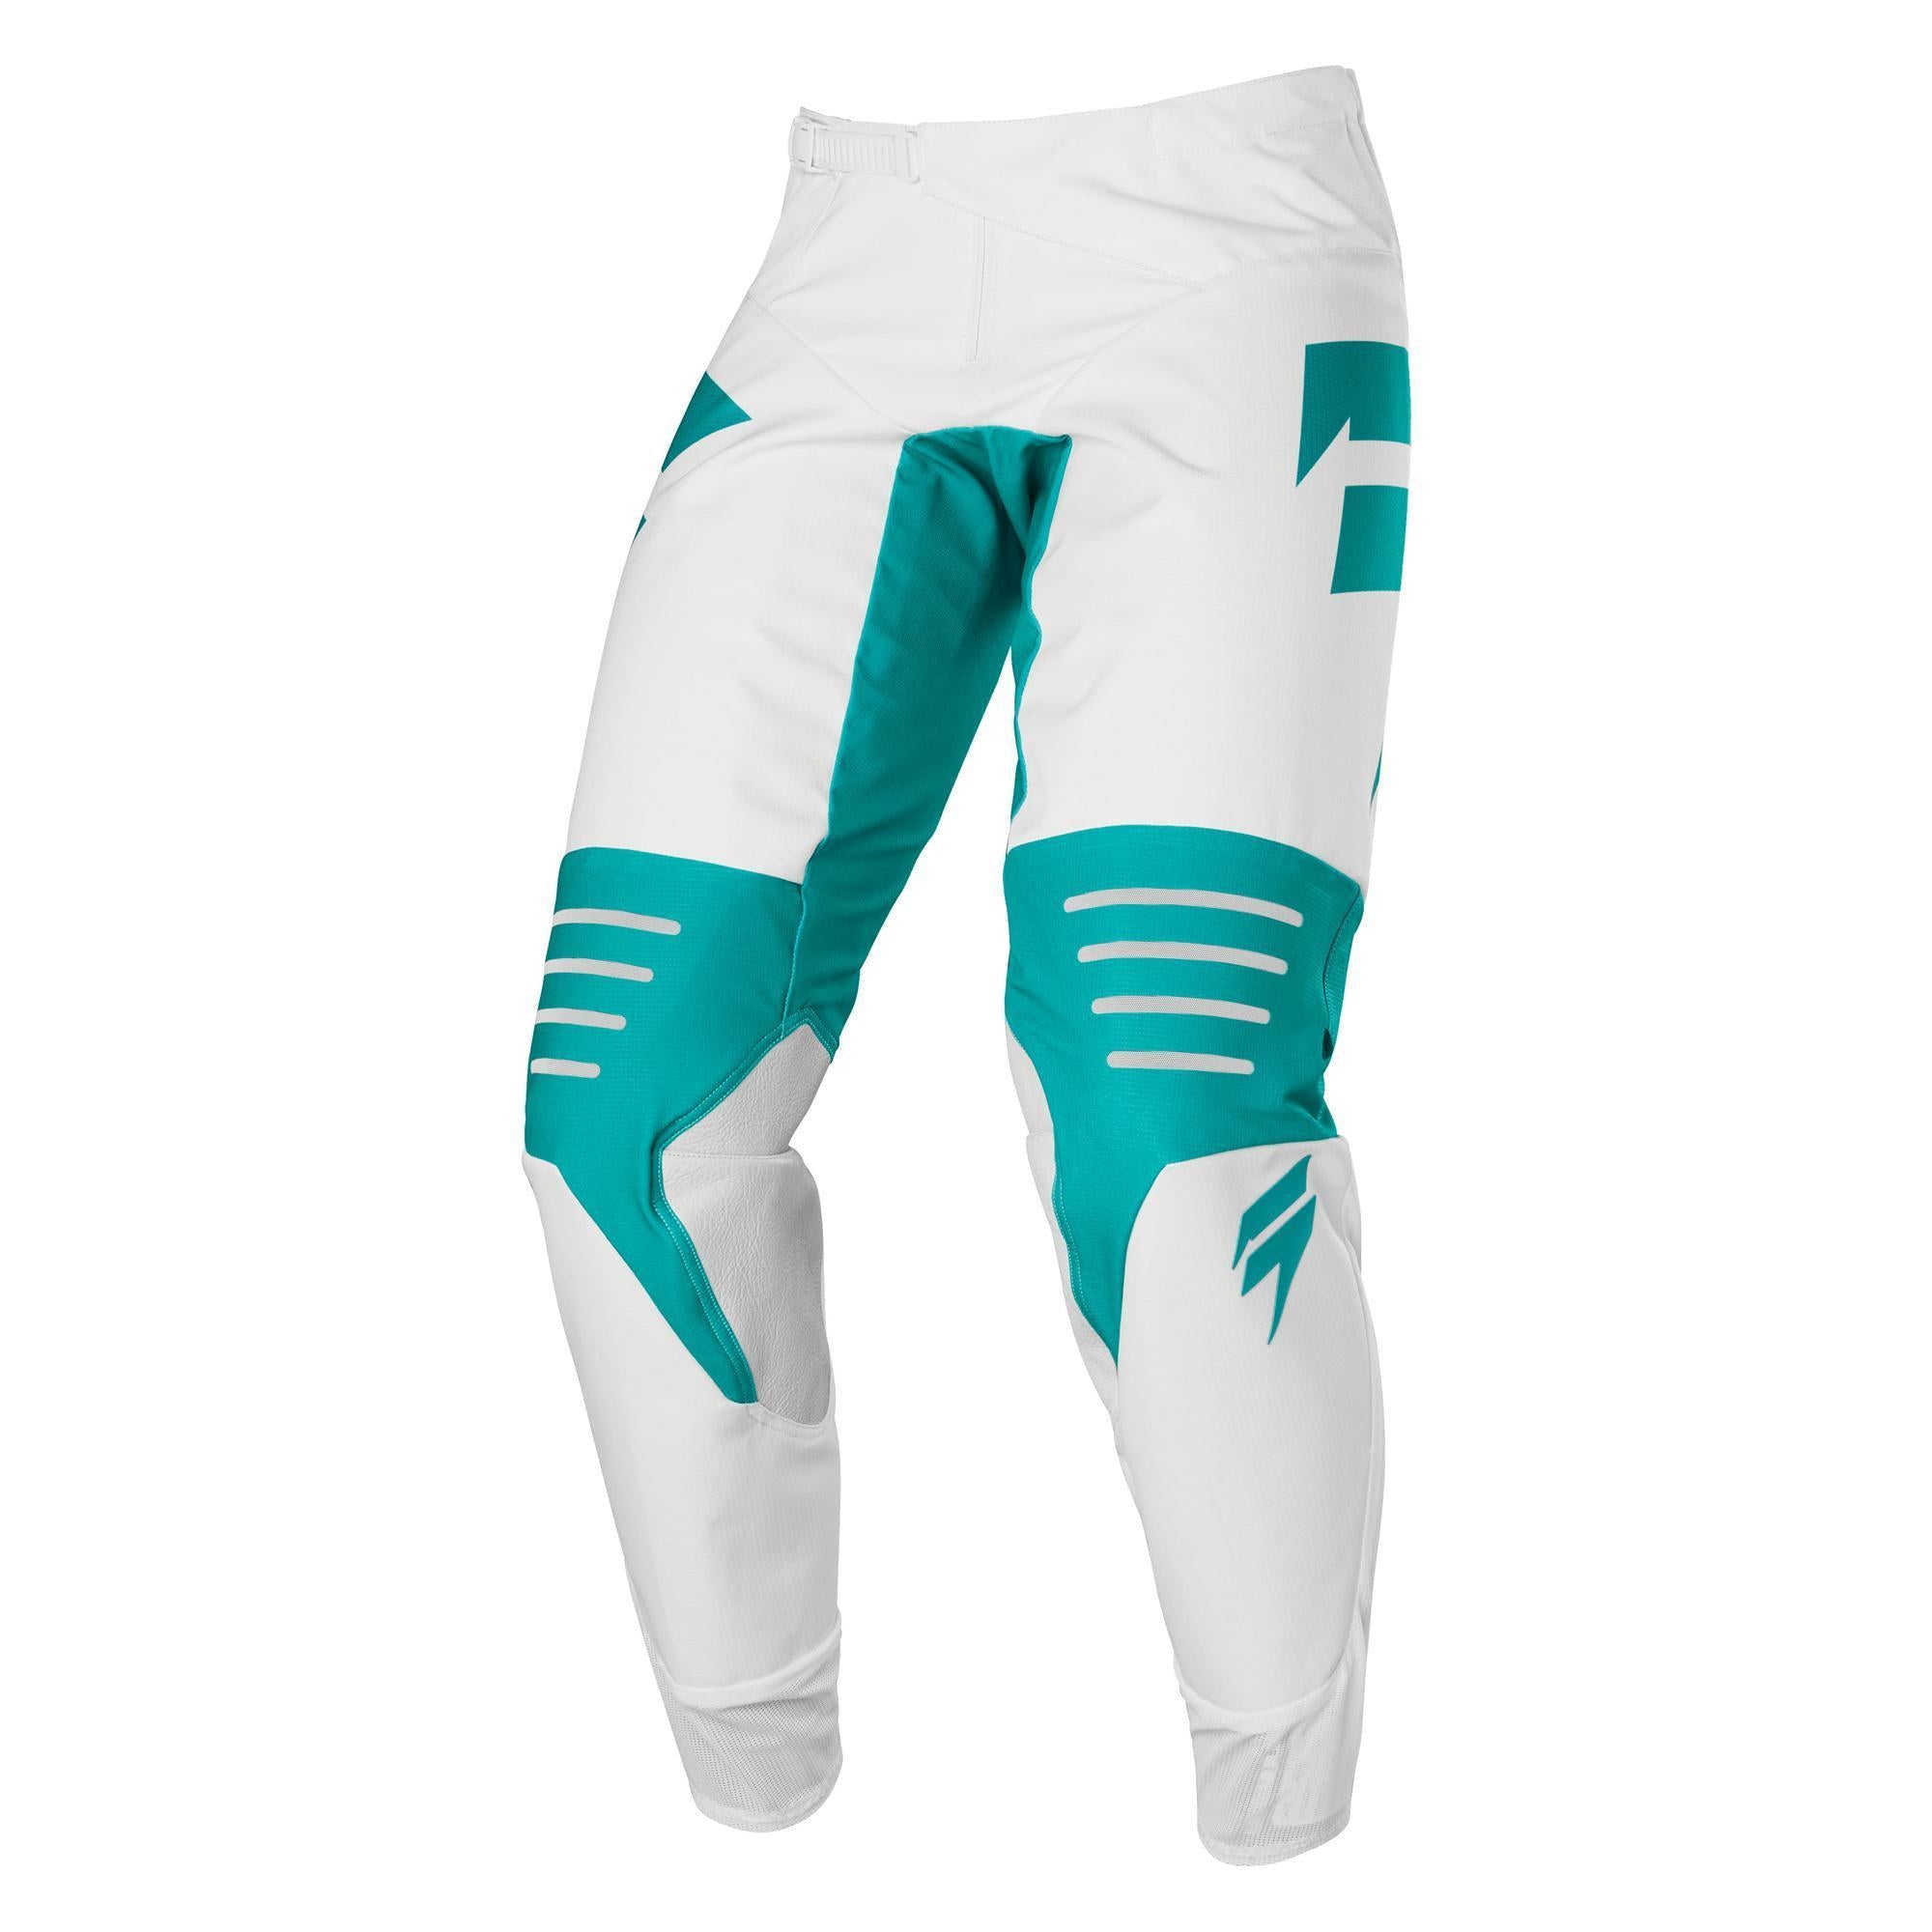 3Lack Label Race Graphic 1 Pant - Fox Racing South Africa